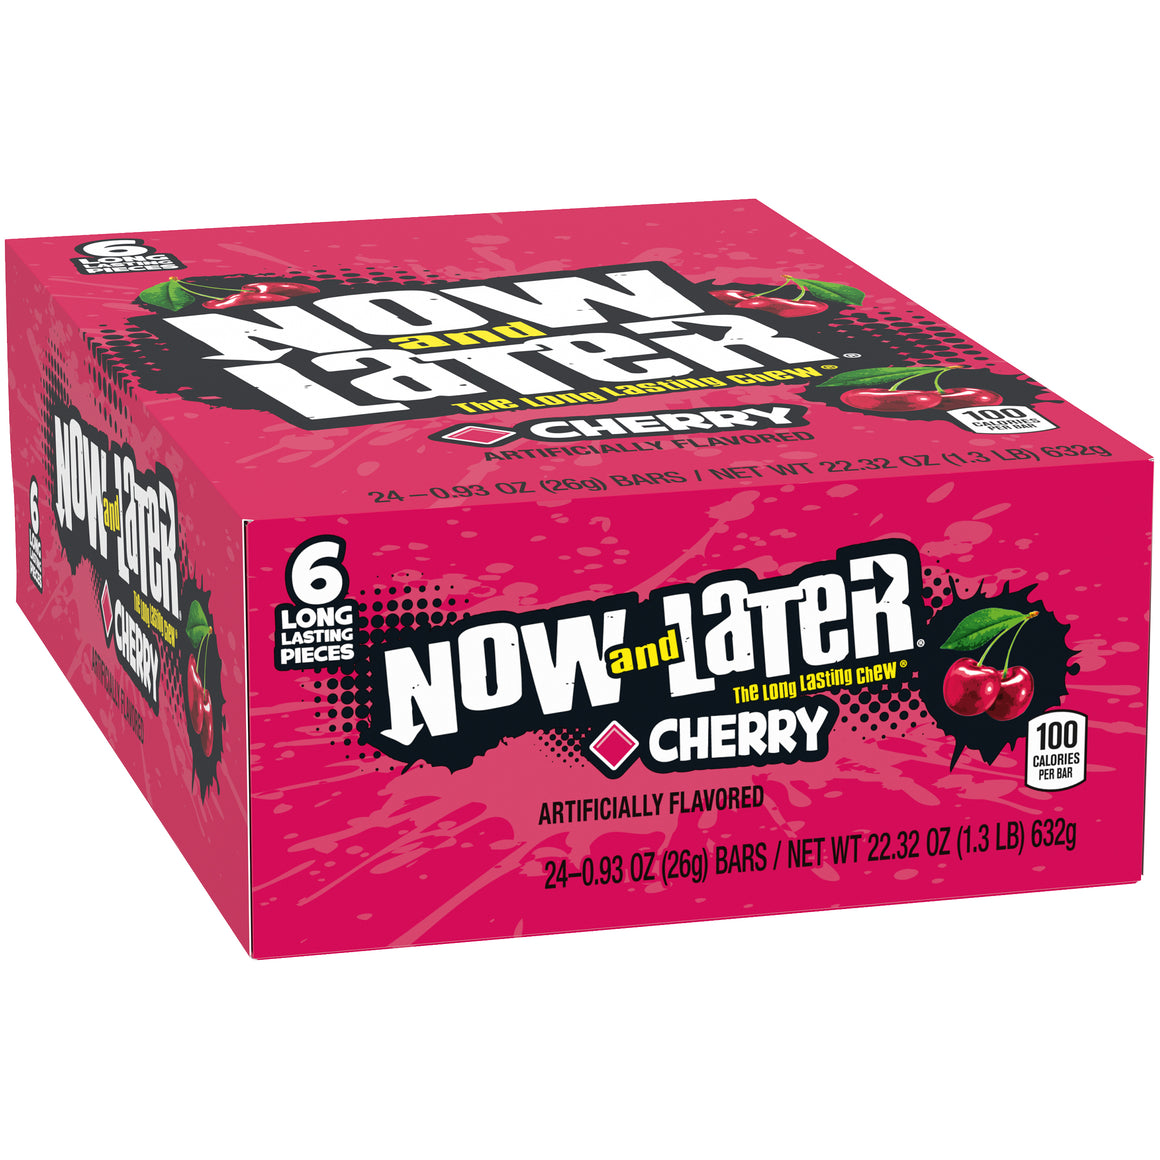 Now and Later Cherry Candy - Case of 24